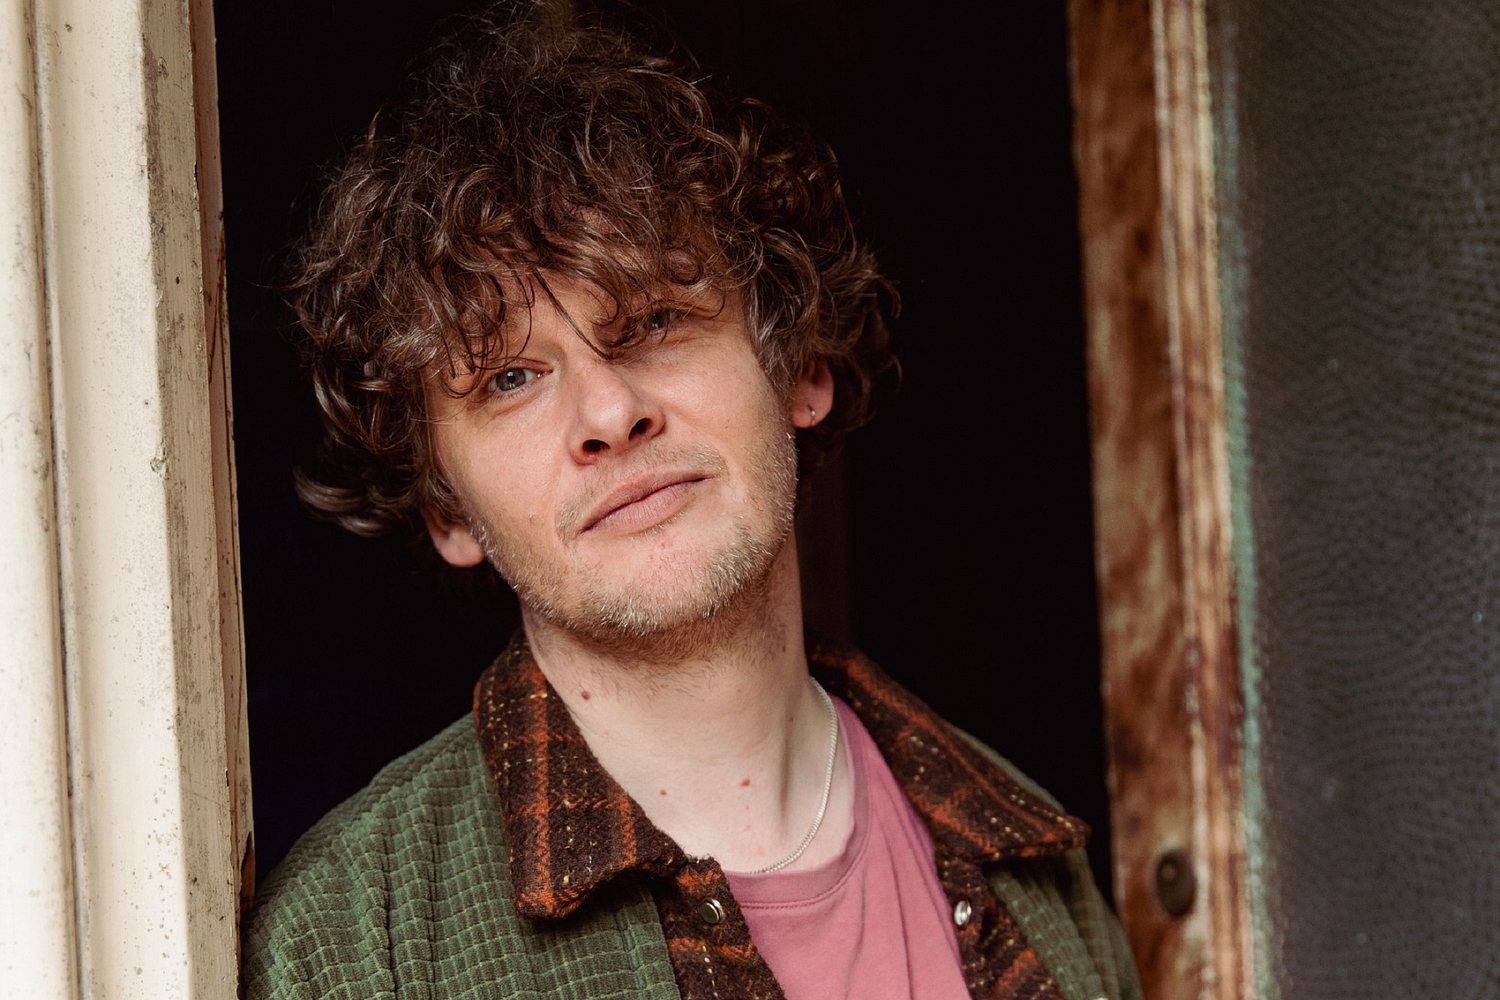 Bill Ryder-Jones releases new single ‘If Tomorrow Starts Without Me’